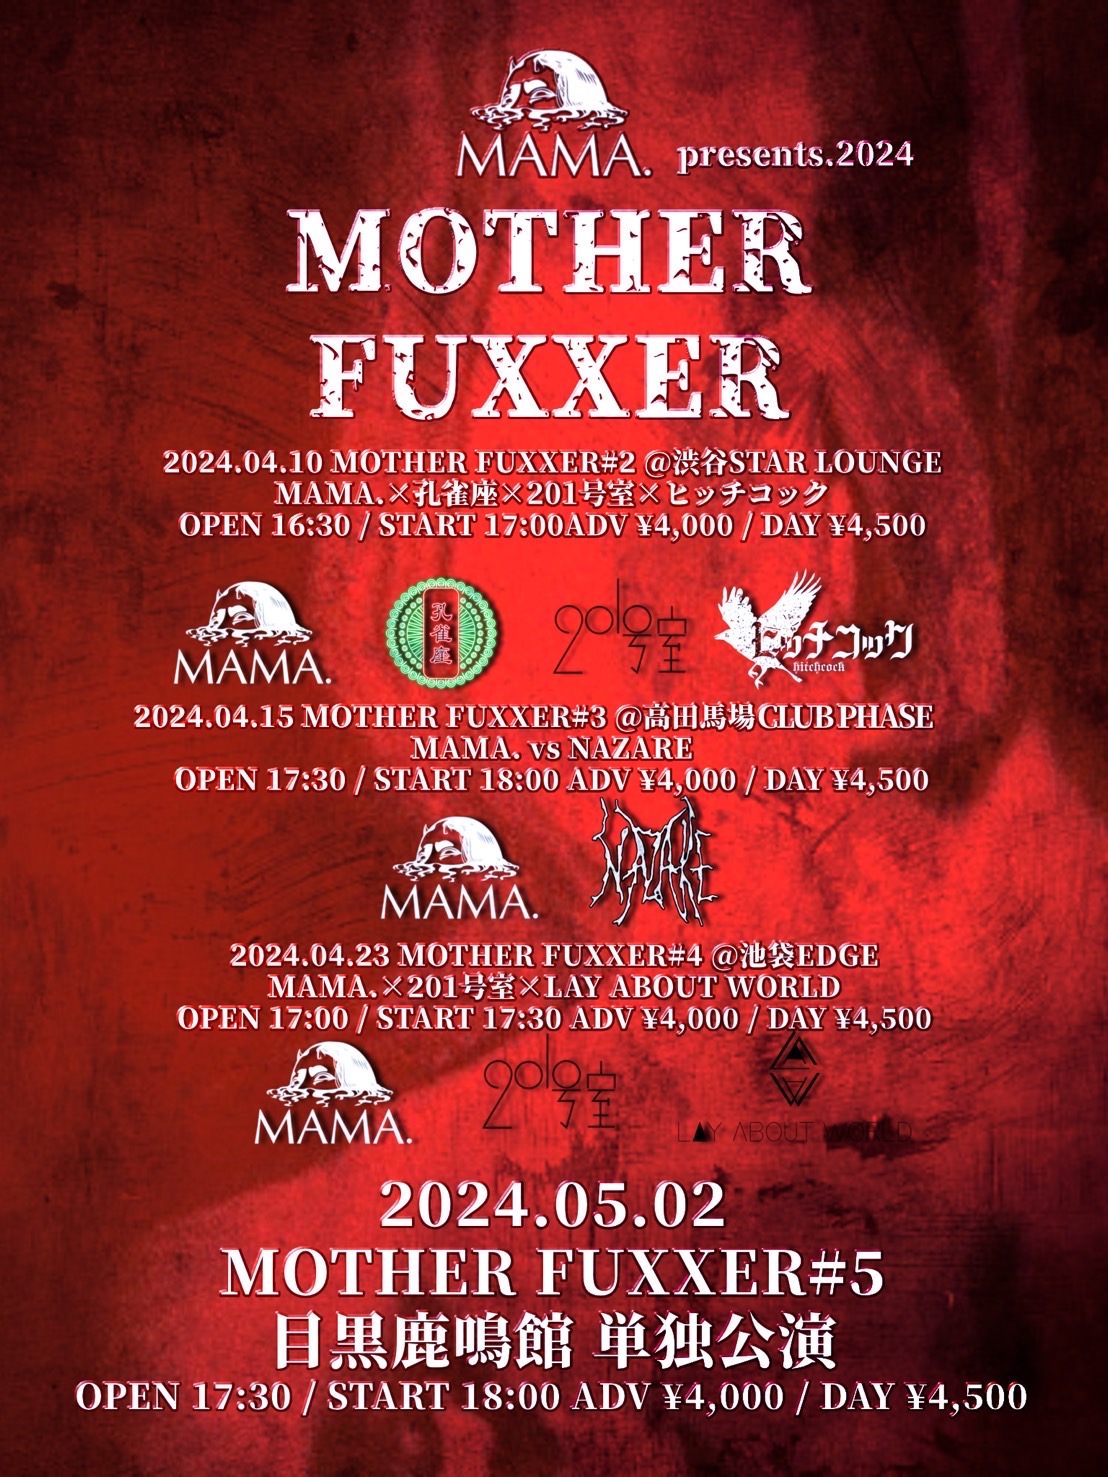 MAMA. presents 「MOTHER FUXXER #4」